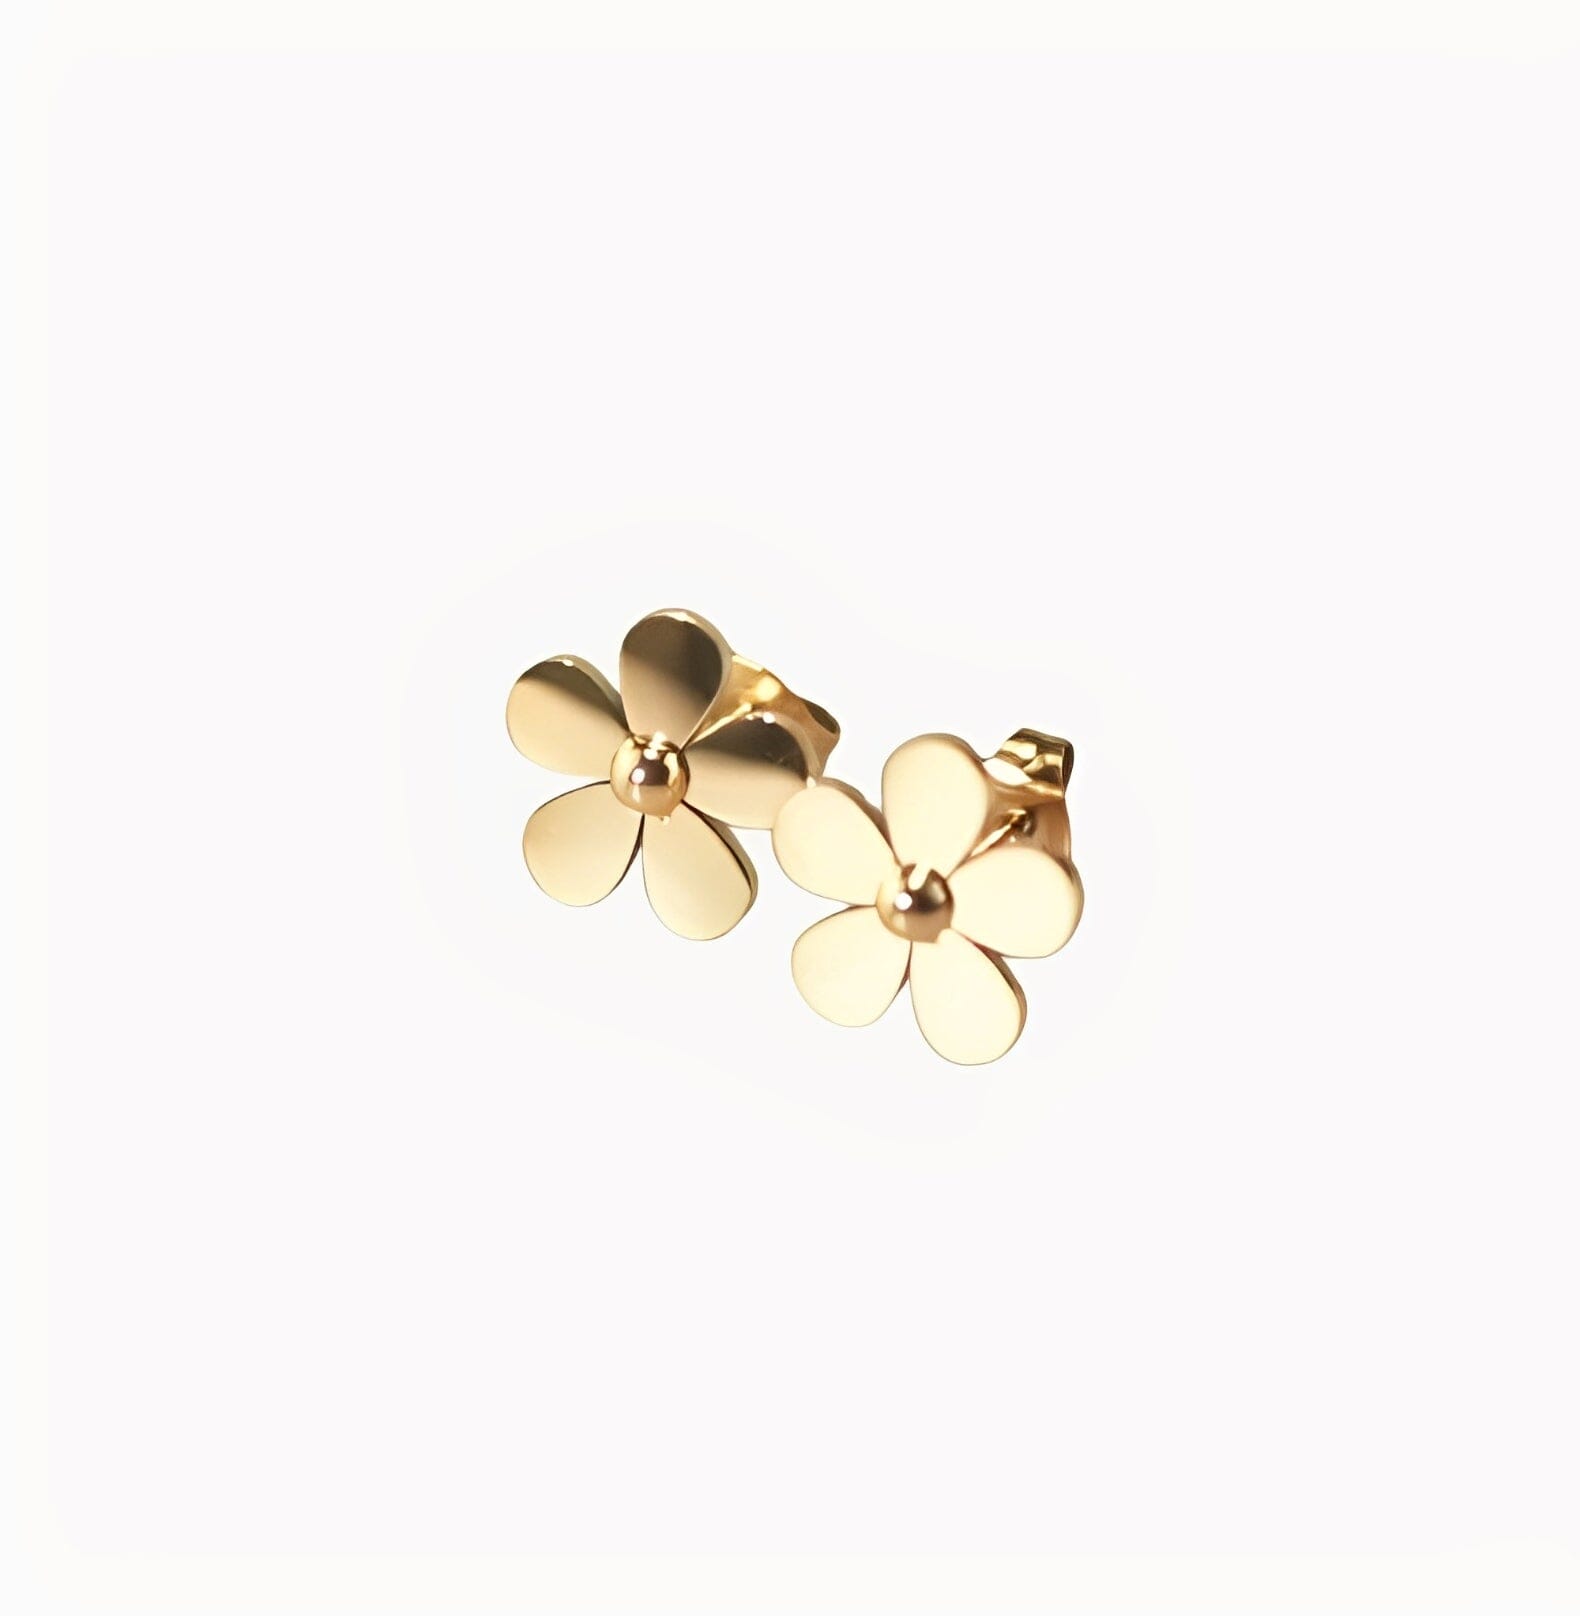 FLOWER STUD EARRINGS braclet Yubama Jewelry Online Store - The Elegant Designs of Gold and Silver ! 